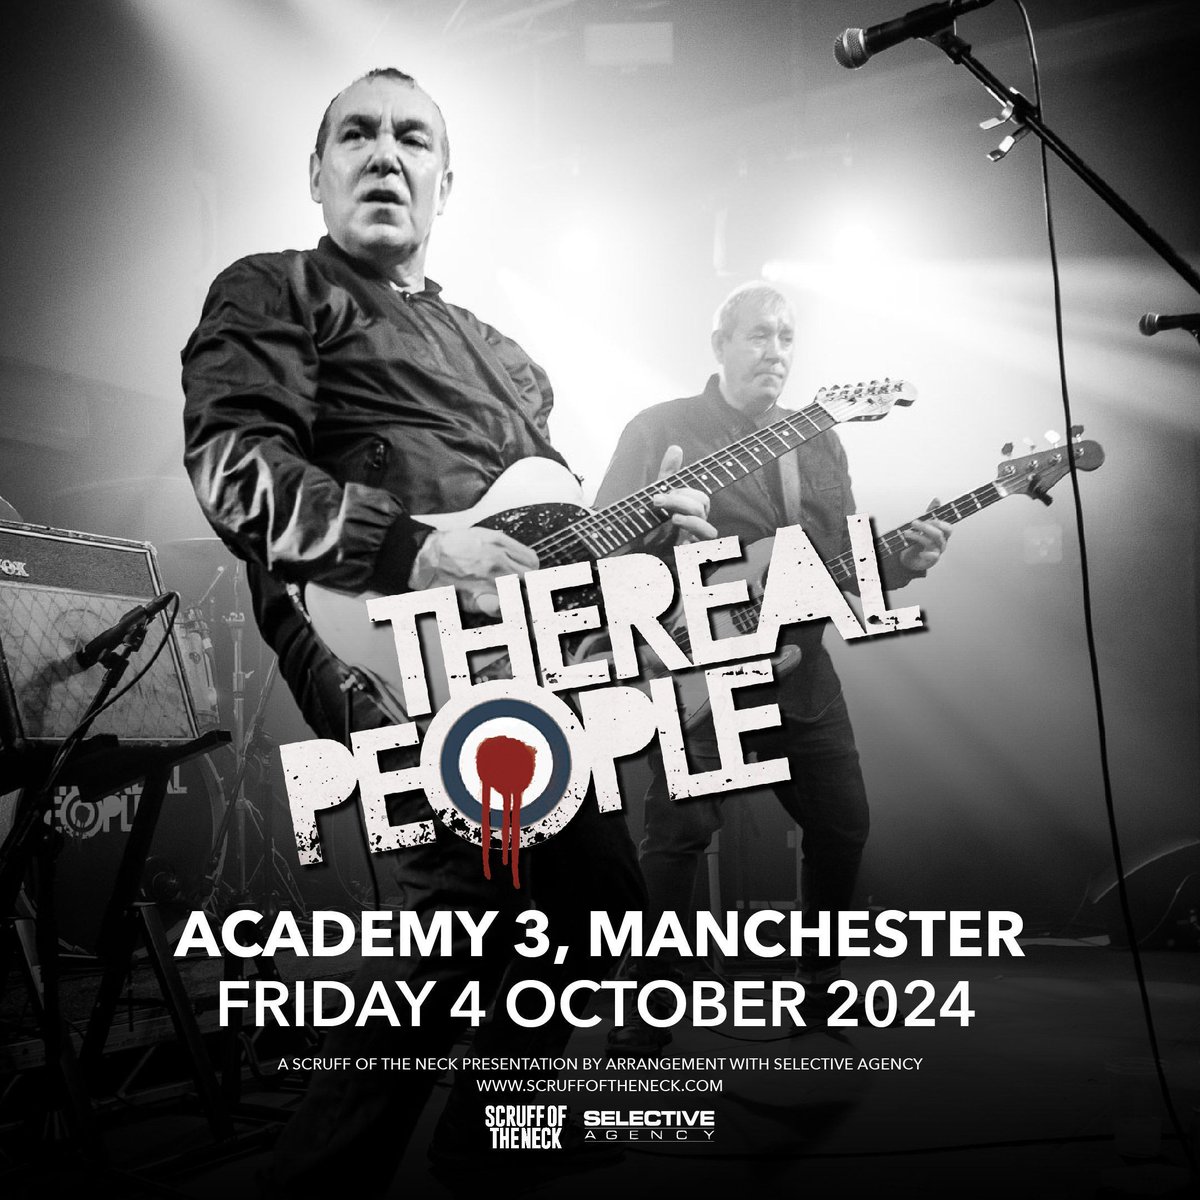 🎯 NEW SHOW: @RealPeopleband 📆 Friday 4th October 2024 // Manchester Academy 3 🎫 TICKETS ON SALE Friday 10am via manchesteracademy.net